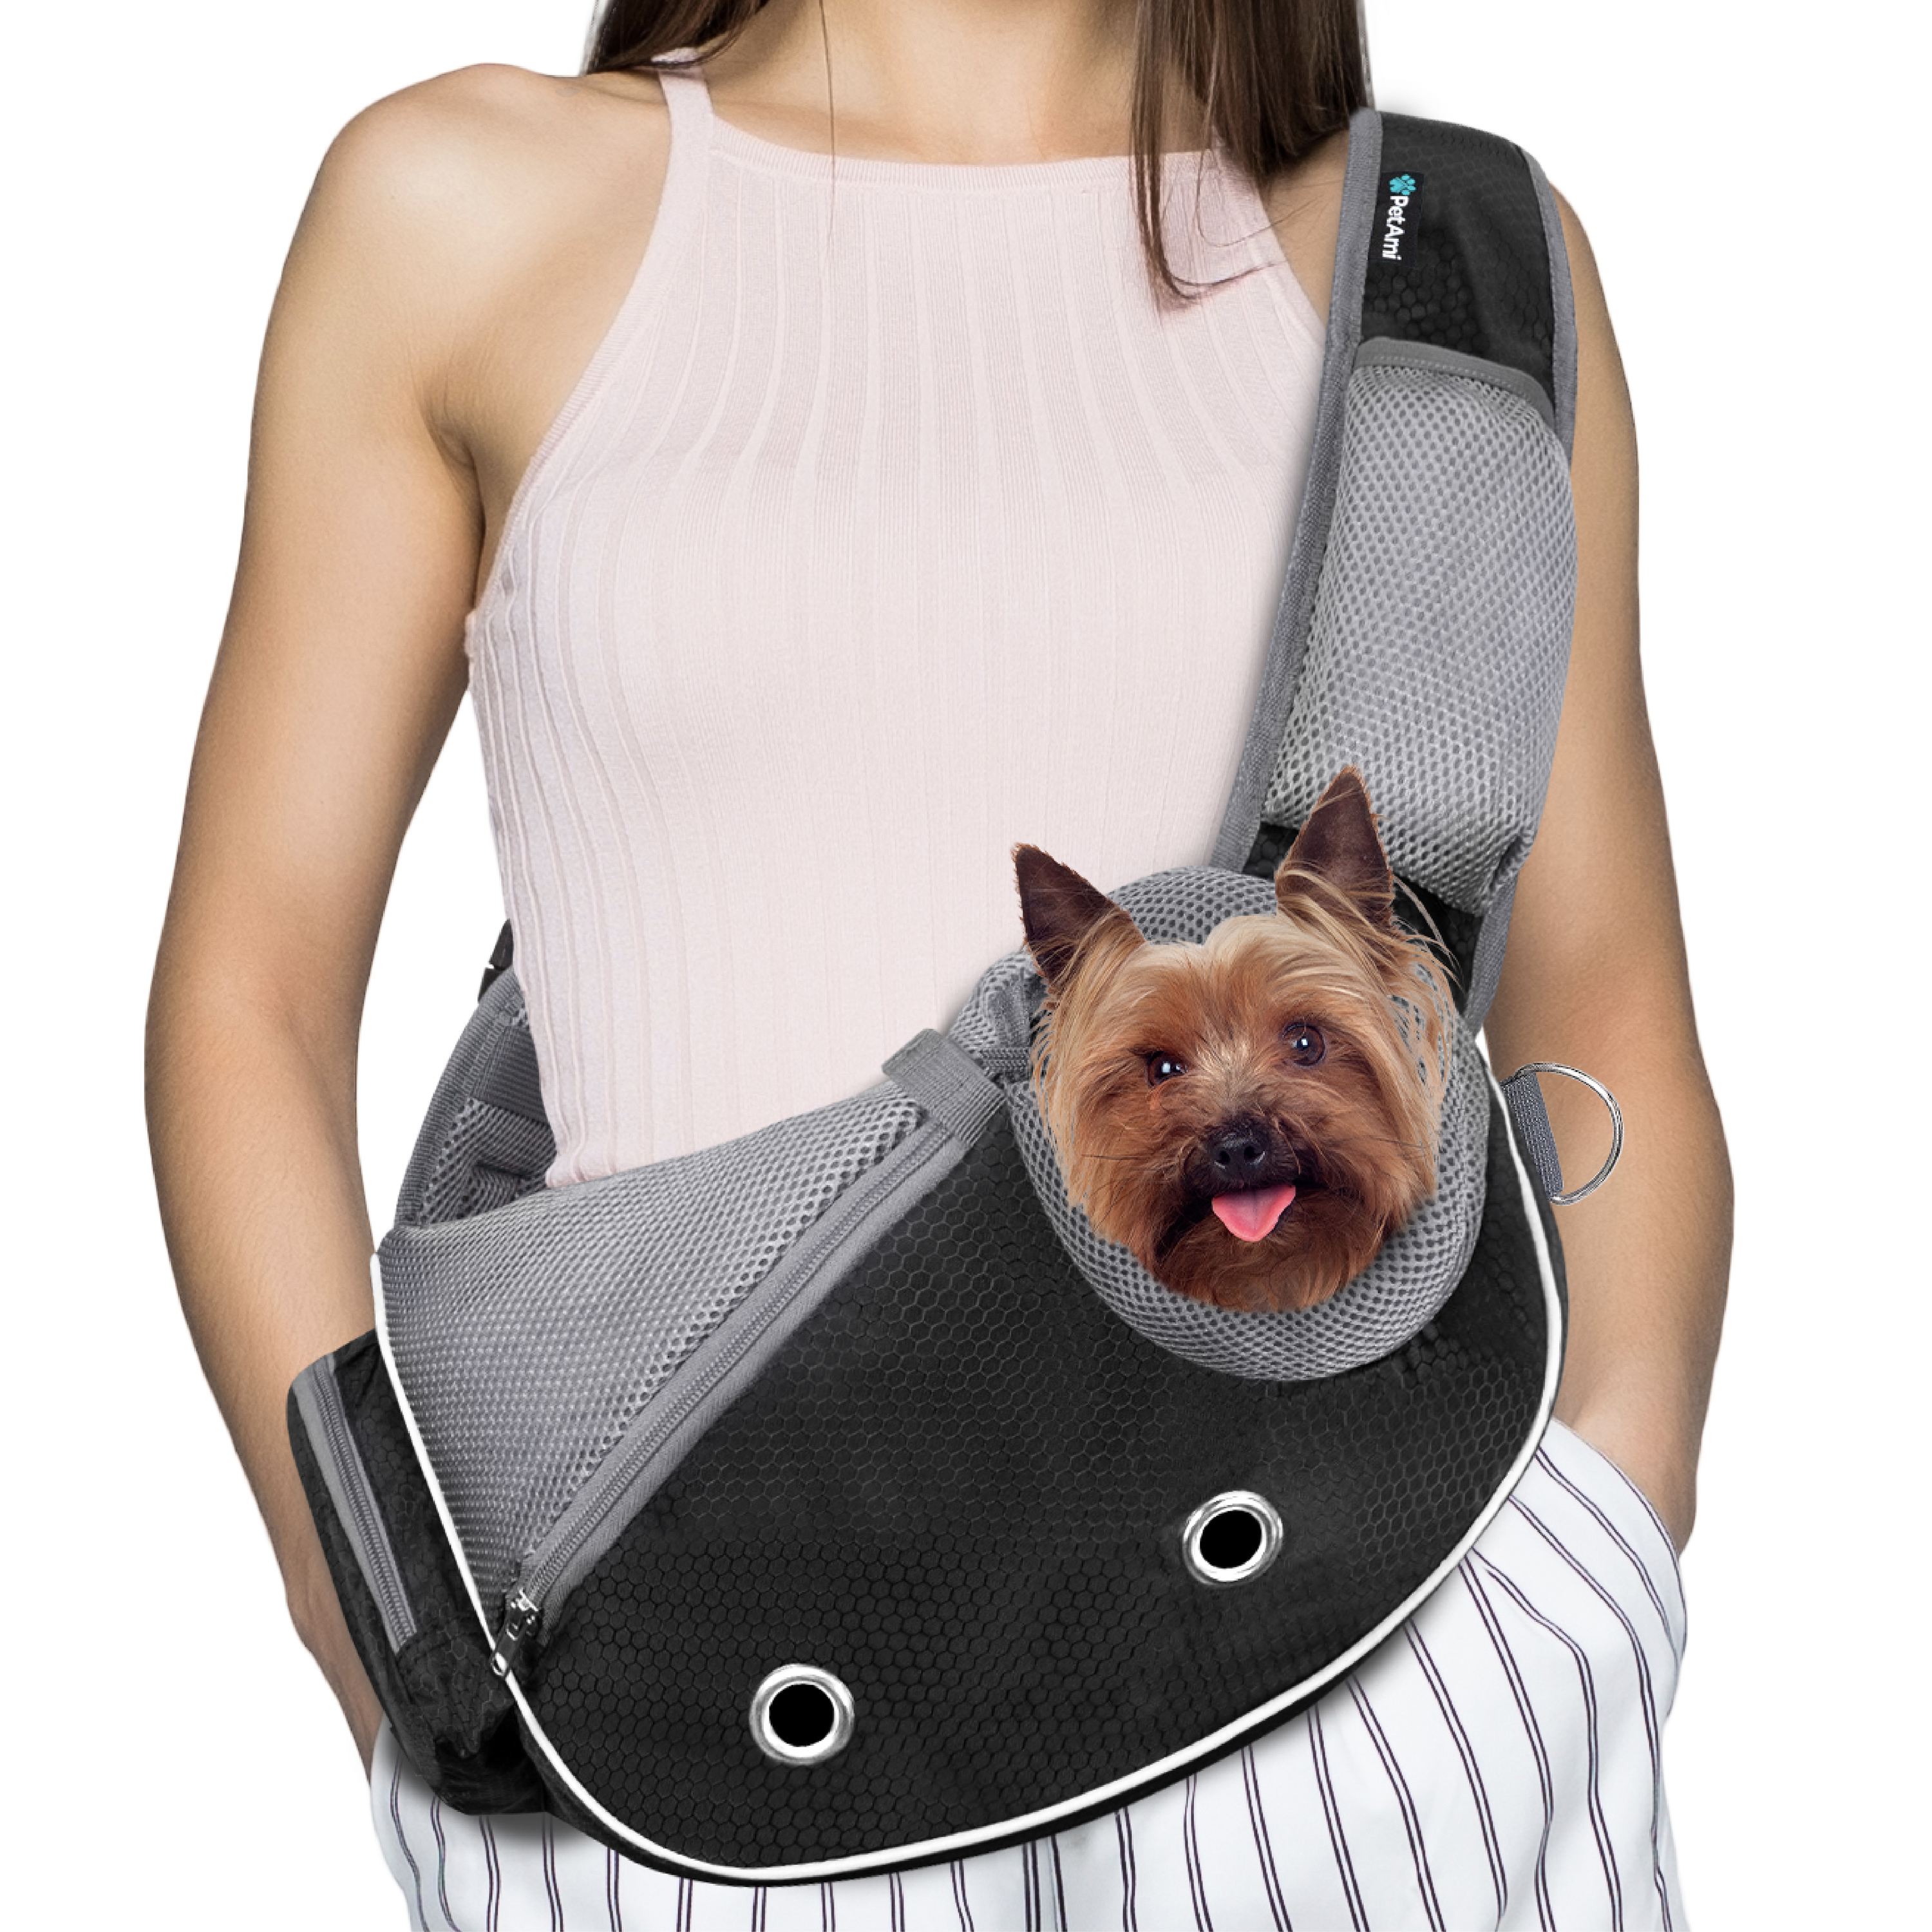 Fashion Dog Purse Carrier for Small Dogs with 2 Extra Pockets, Holds Up to  10lbs Pu Leather Cloth Pet Carrier, Cat Carrier, Airline Approved Puppy